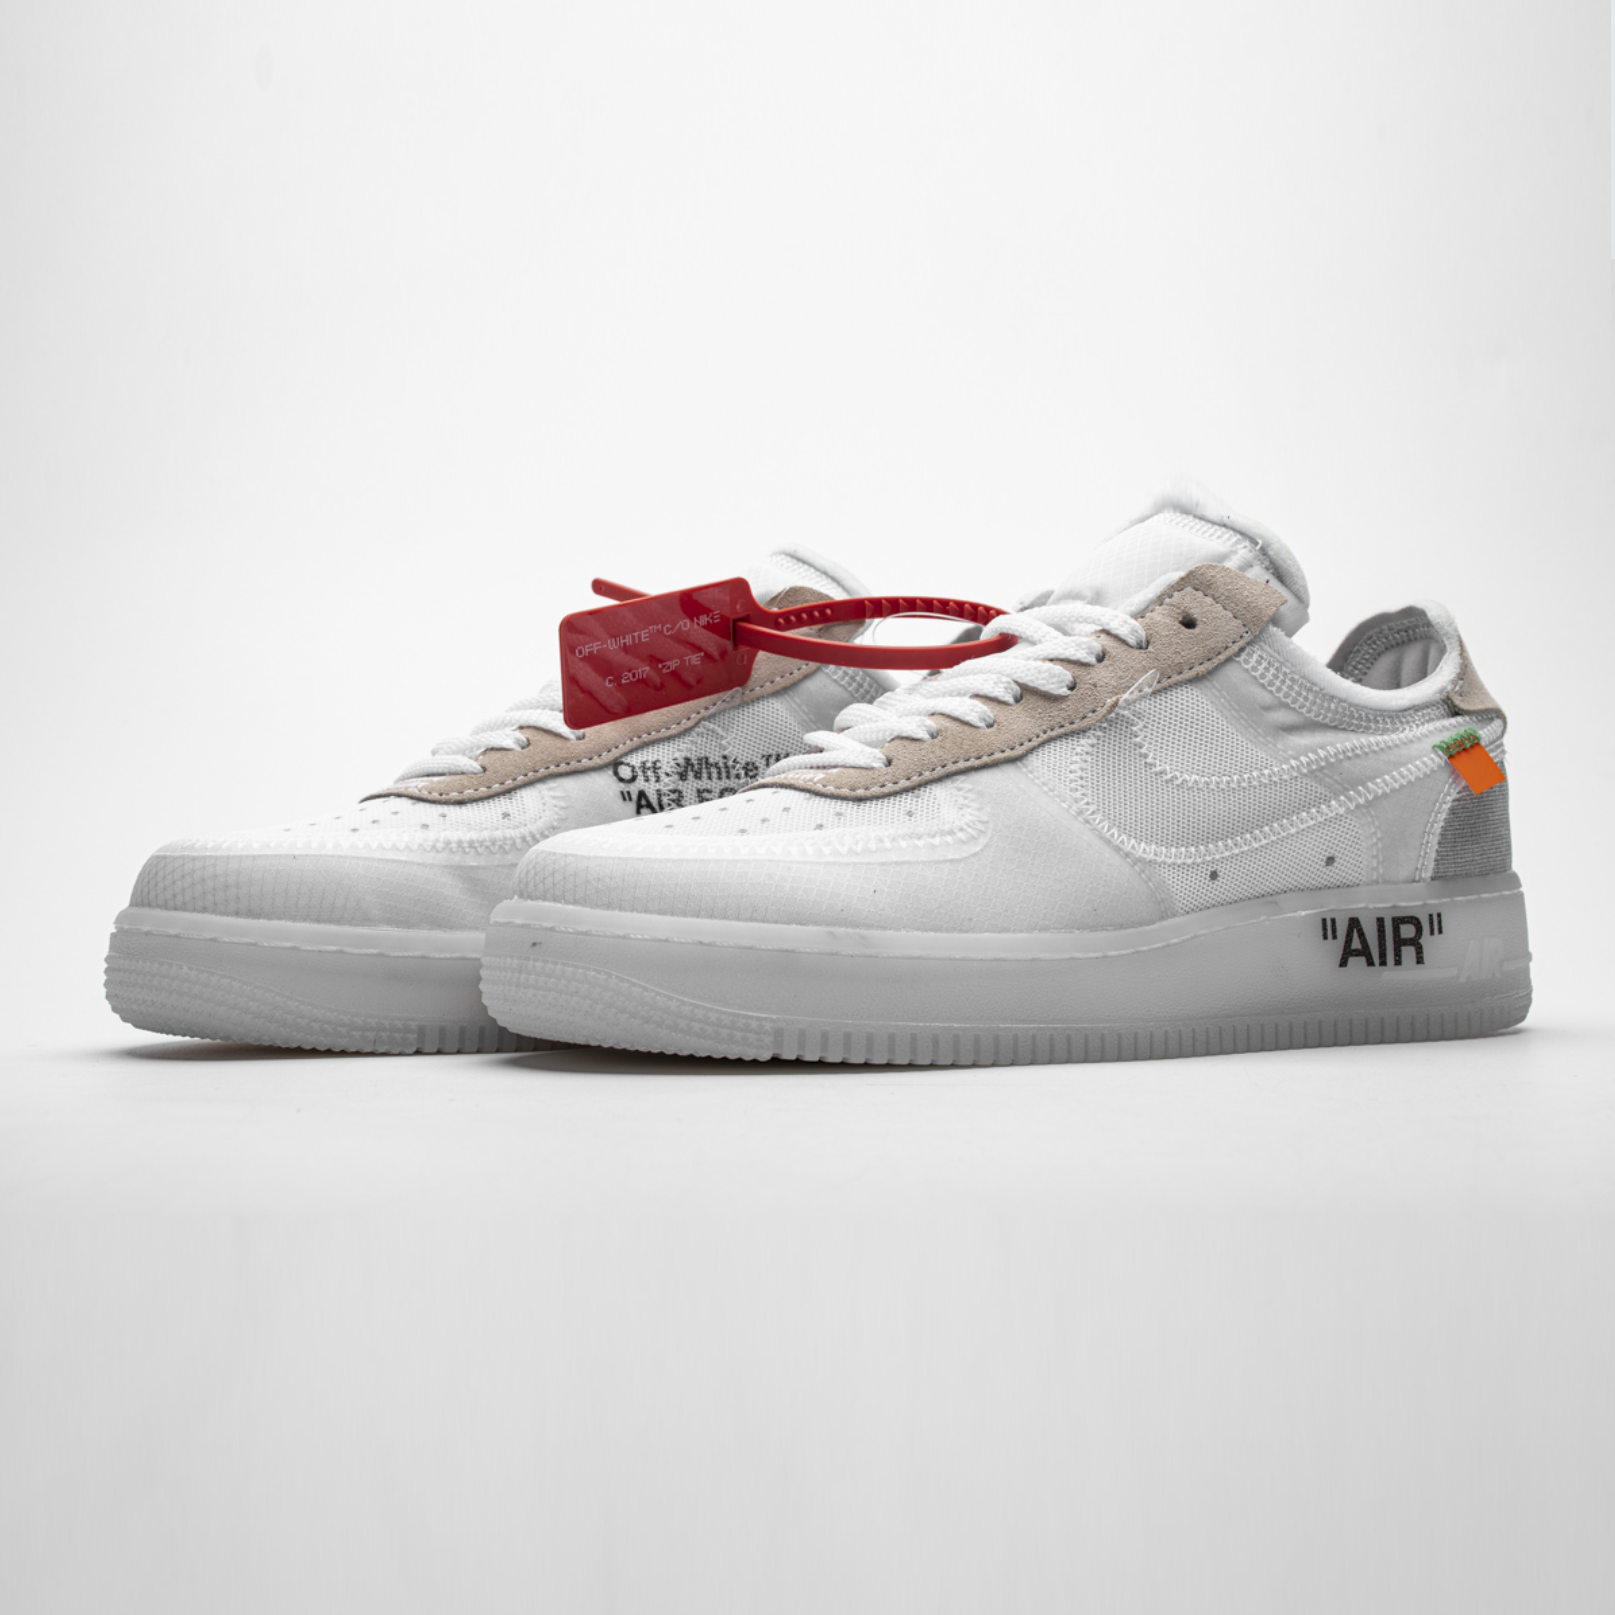 Nike Off White Air Force 1 Low "The Ten"